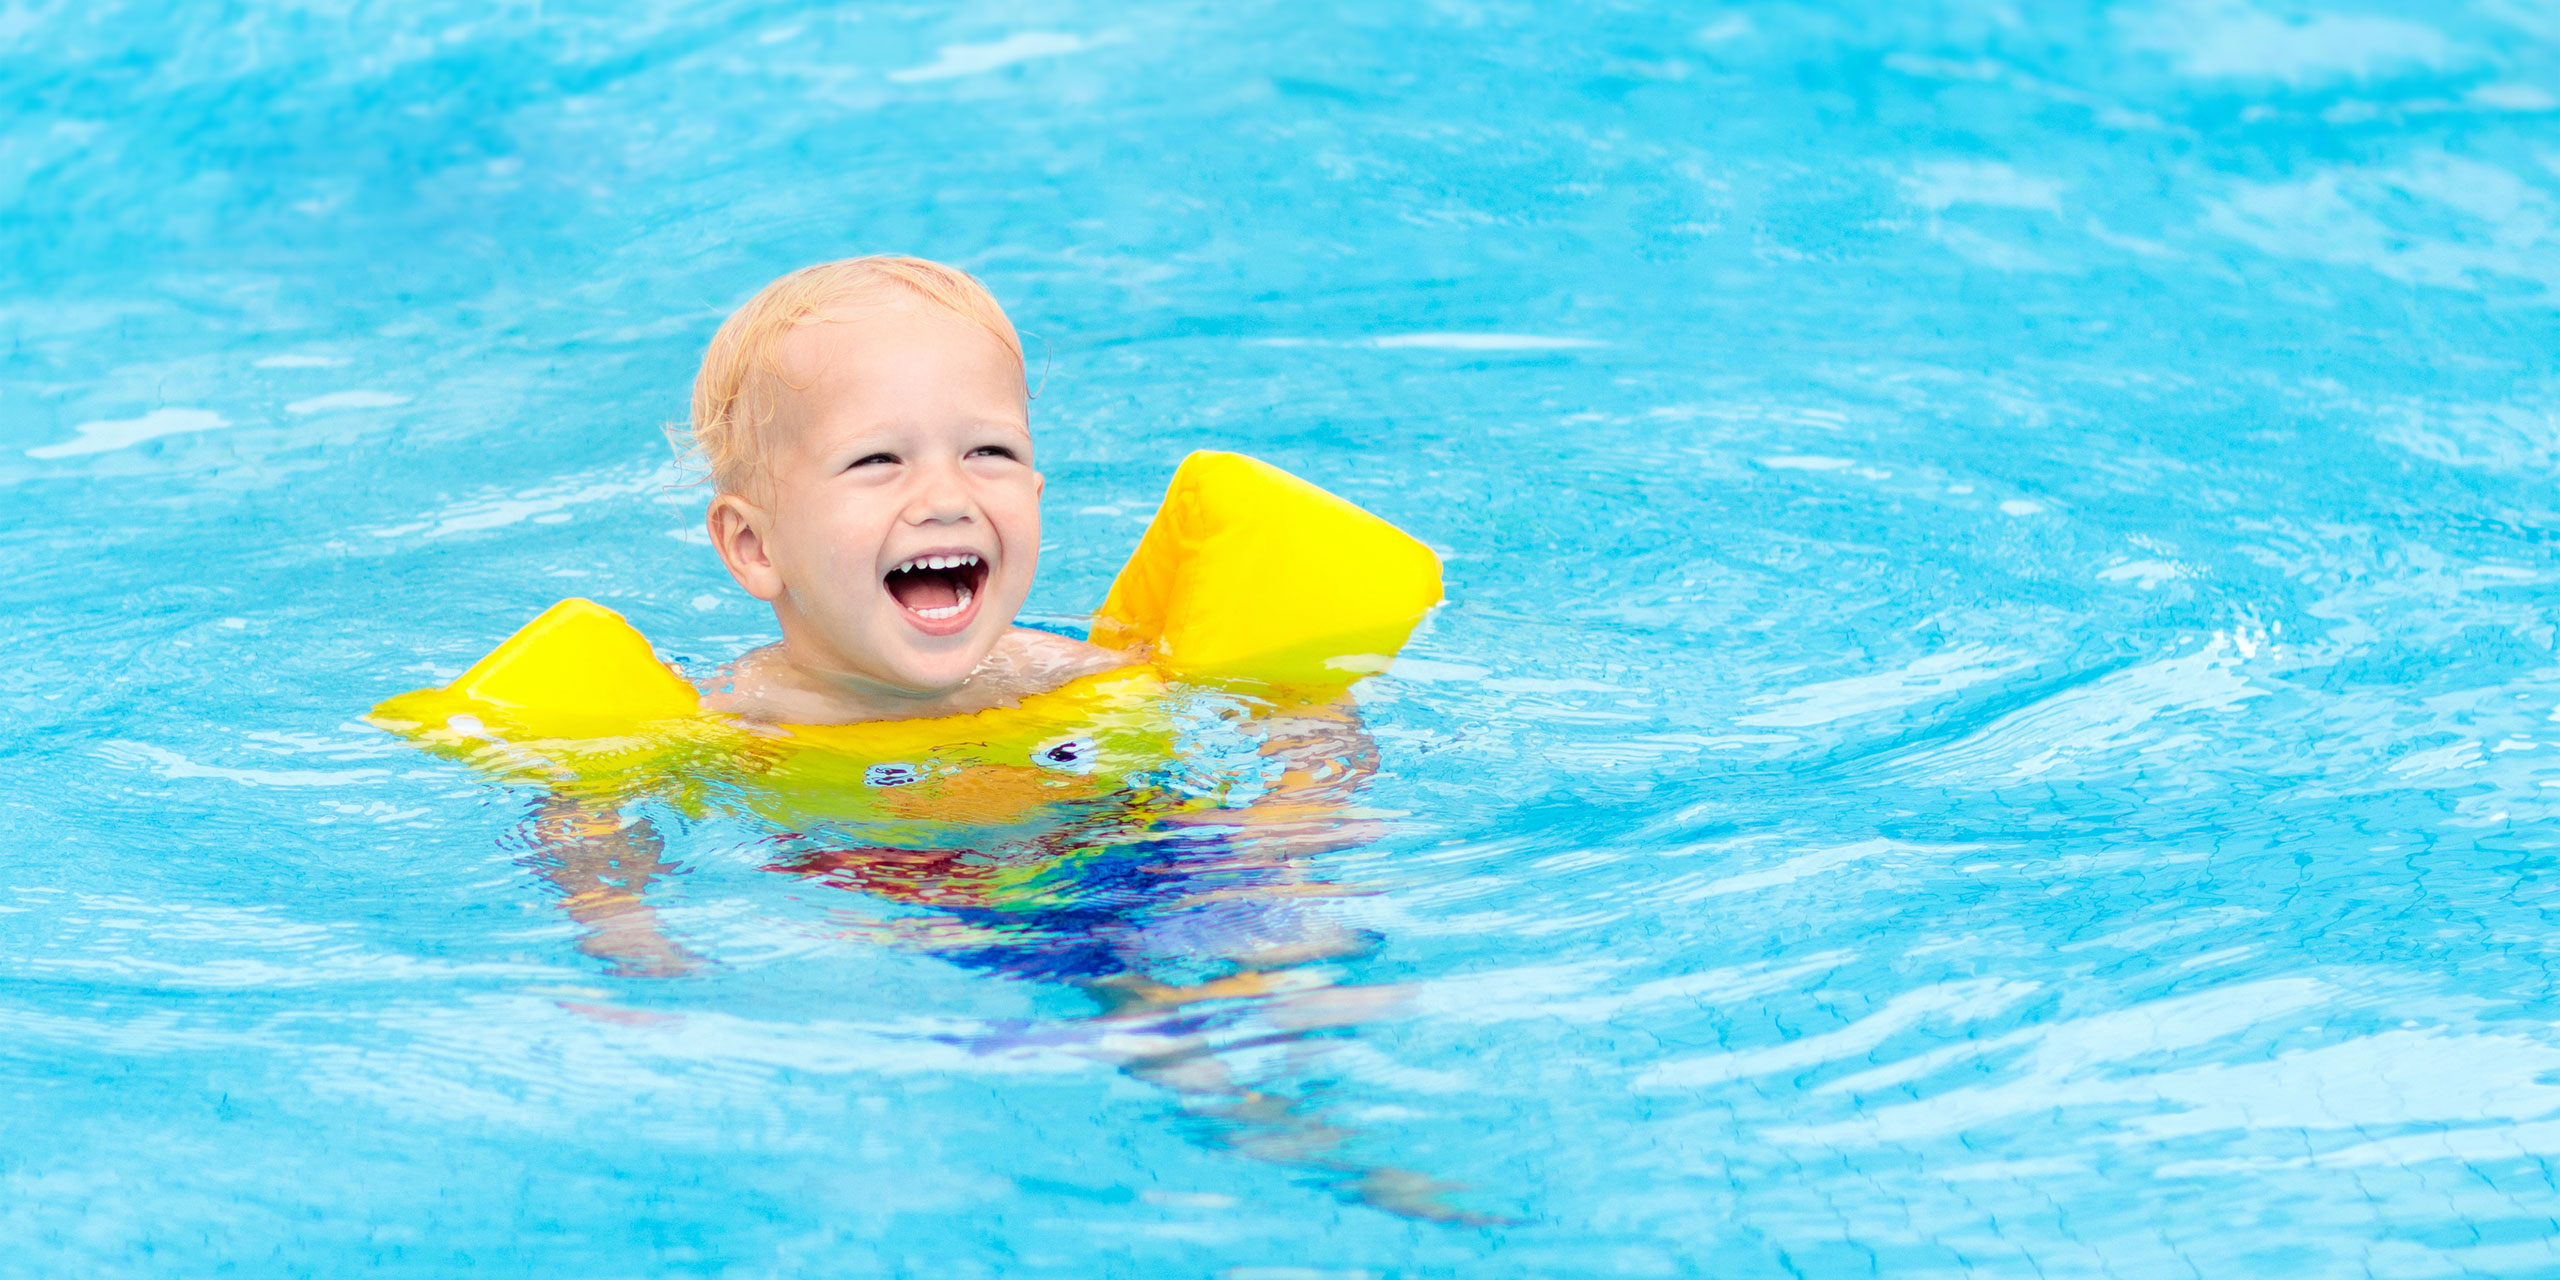 Toddler in Swimming Pool With Yellow Life Jacket